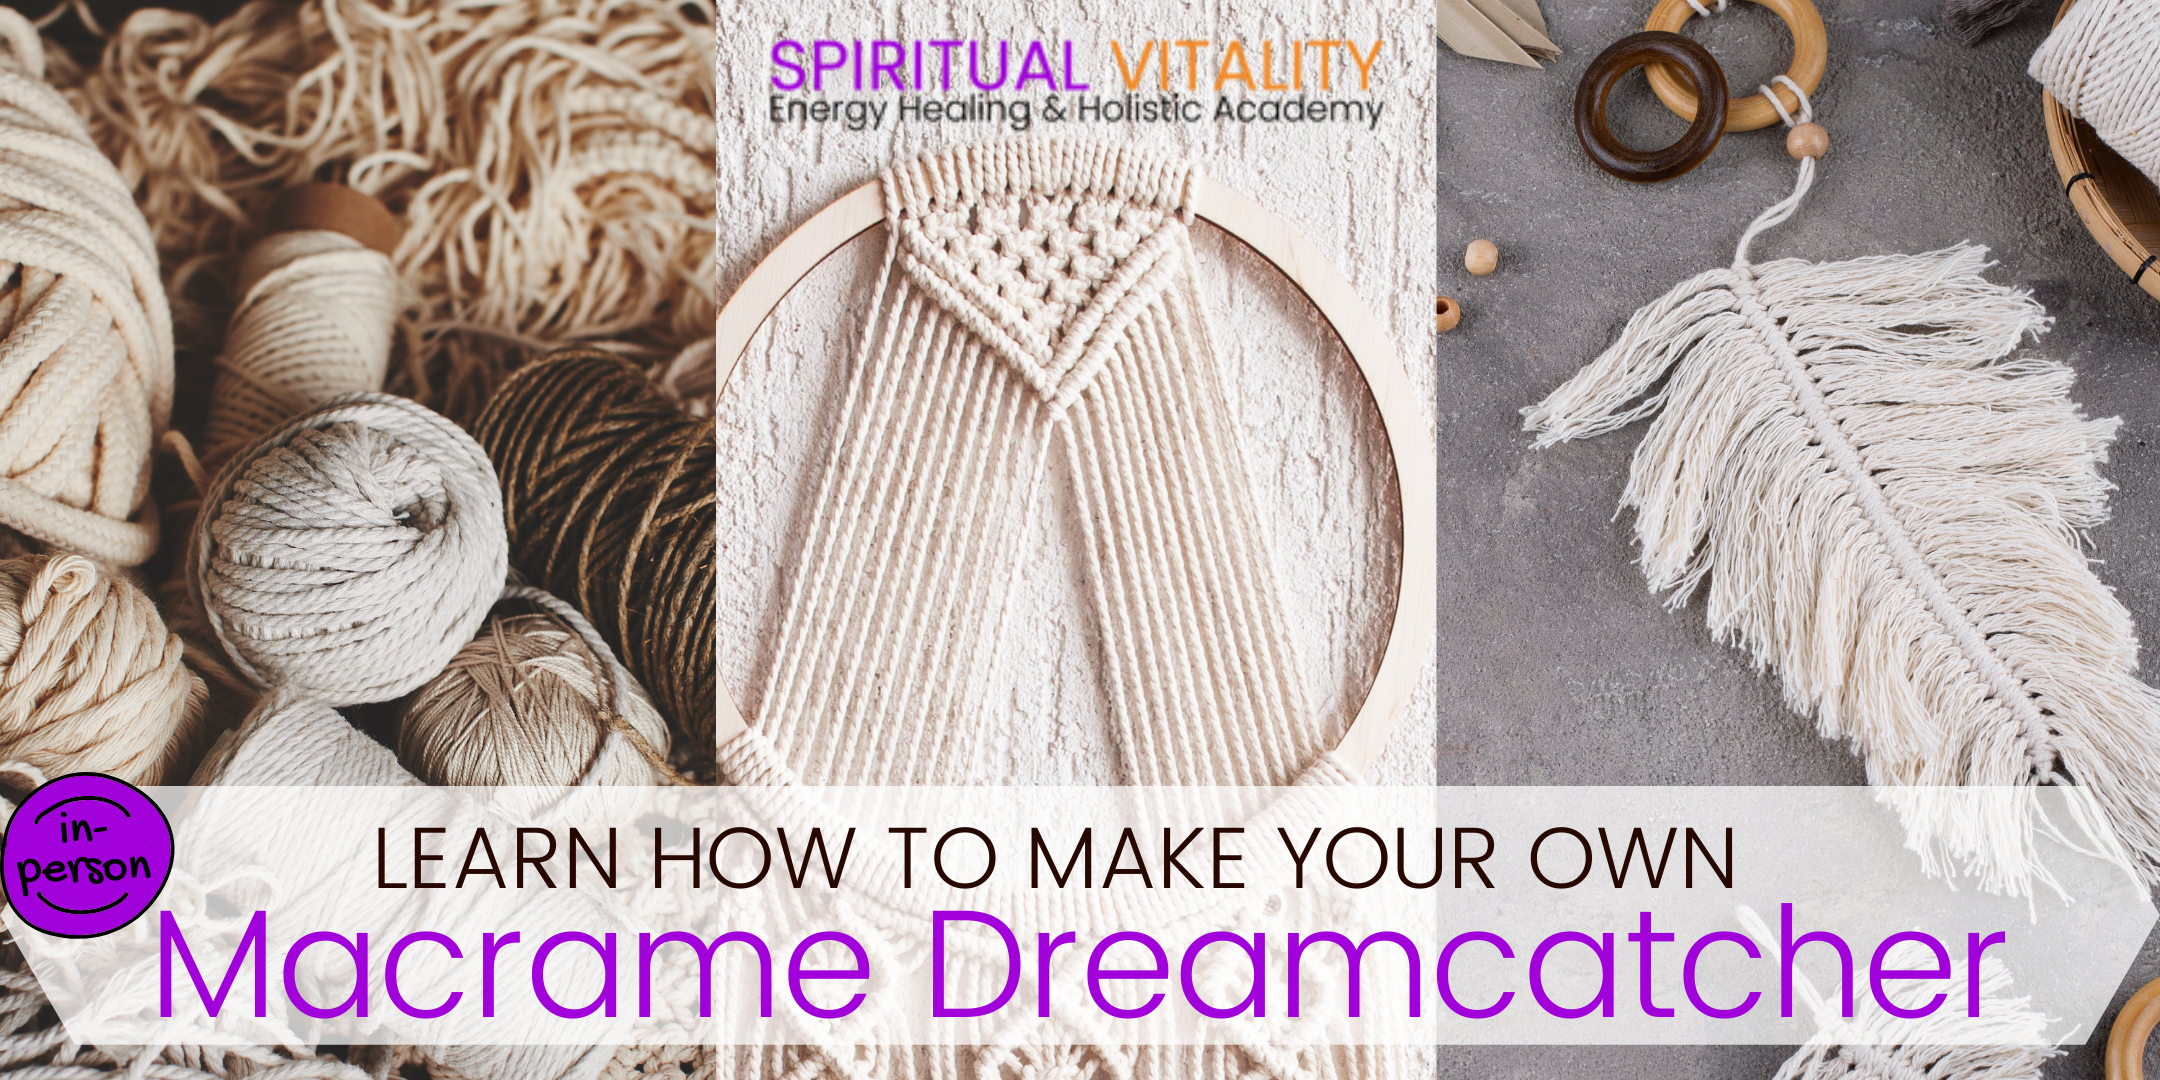 Learn how to make your own Macrame Dreamcatcher